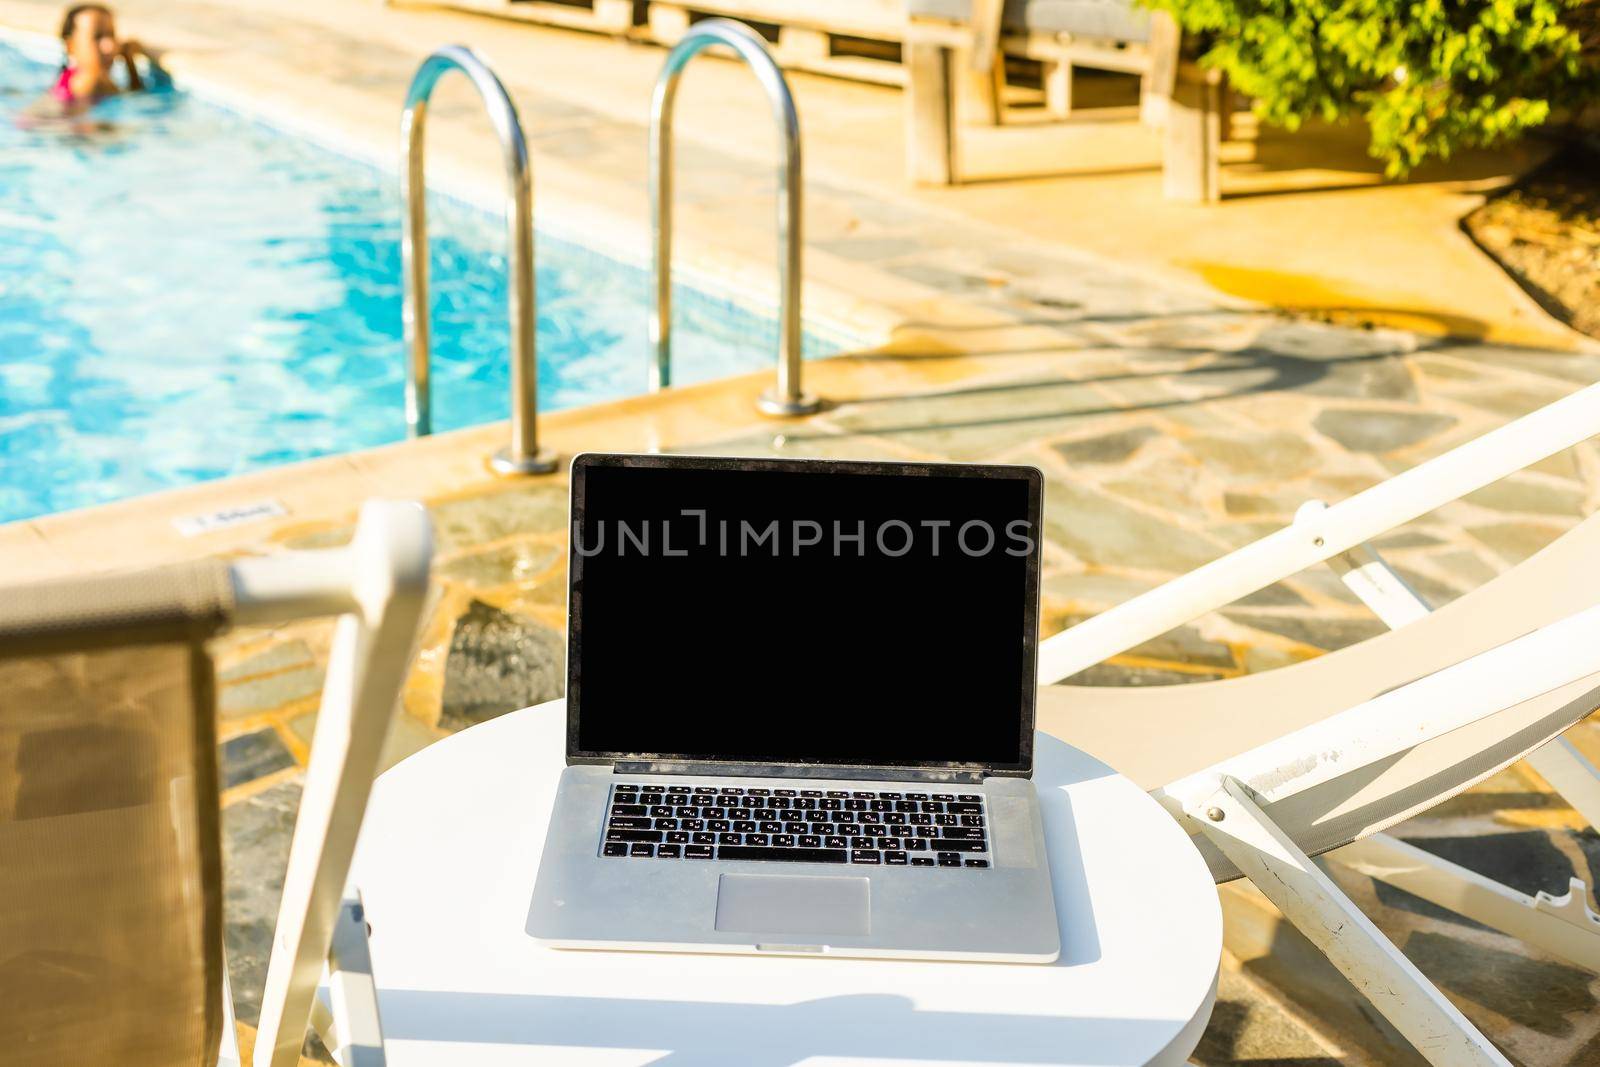 computer on table background as a pool.